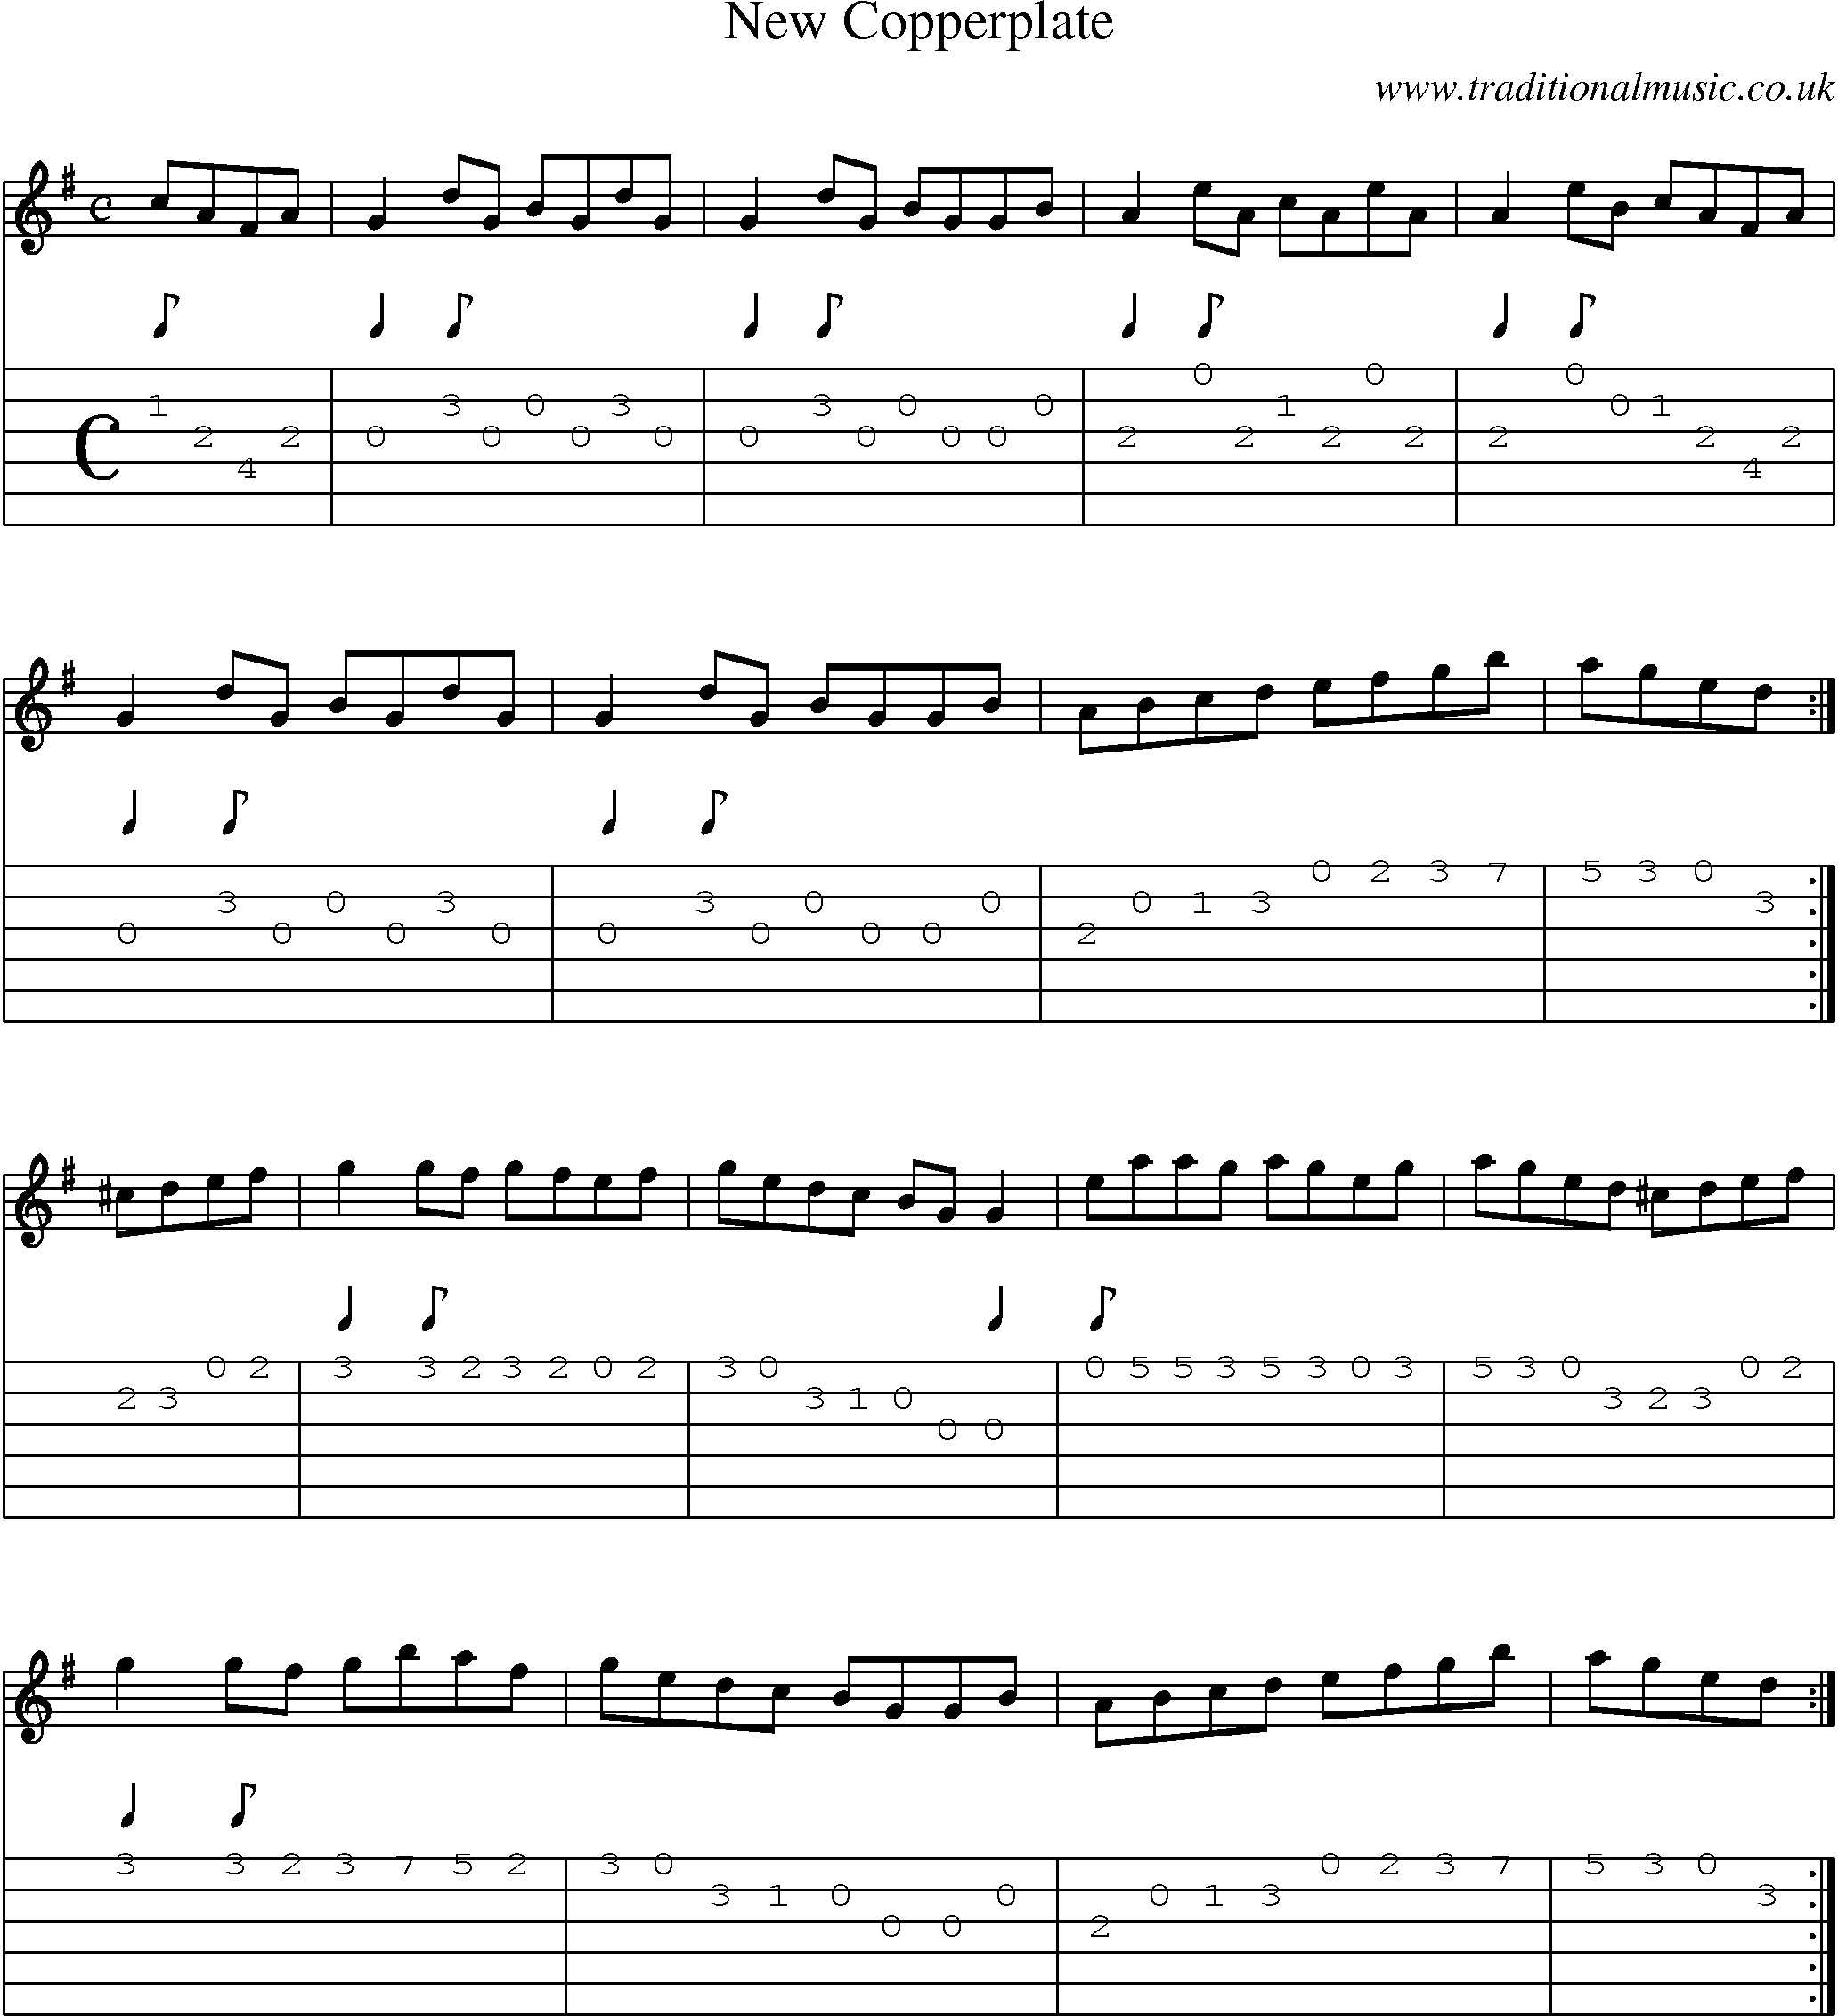 Music Score and Guitar Tabs for New Copperplate